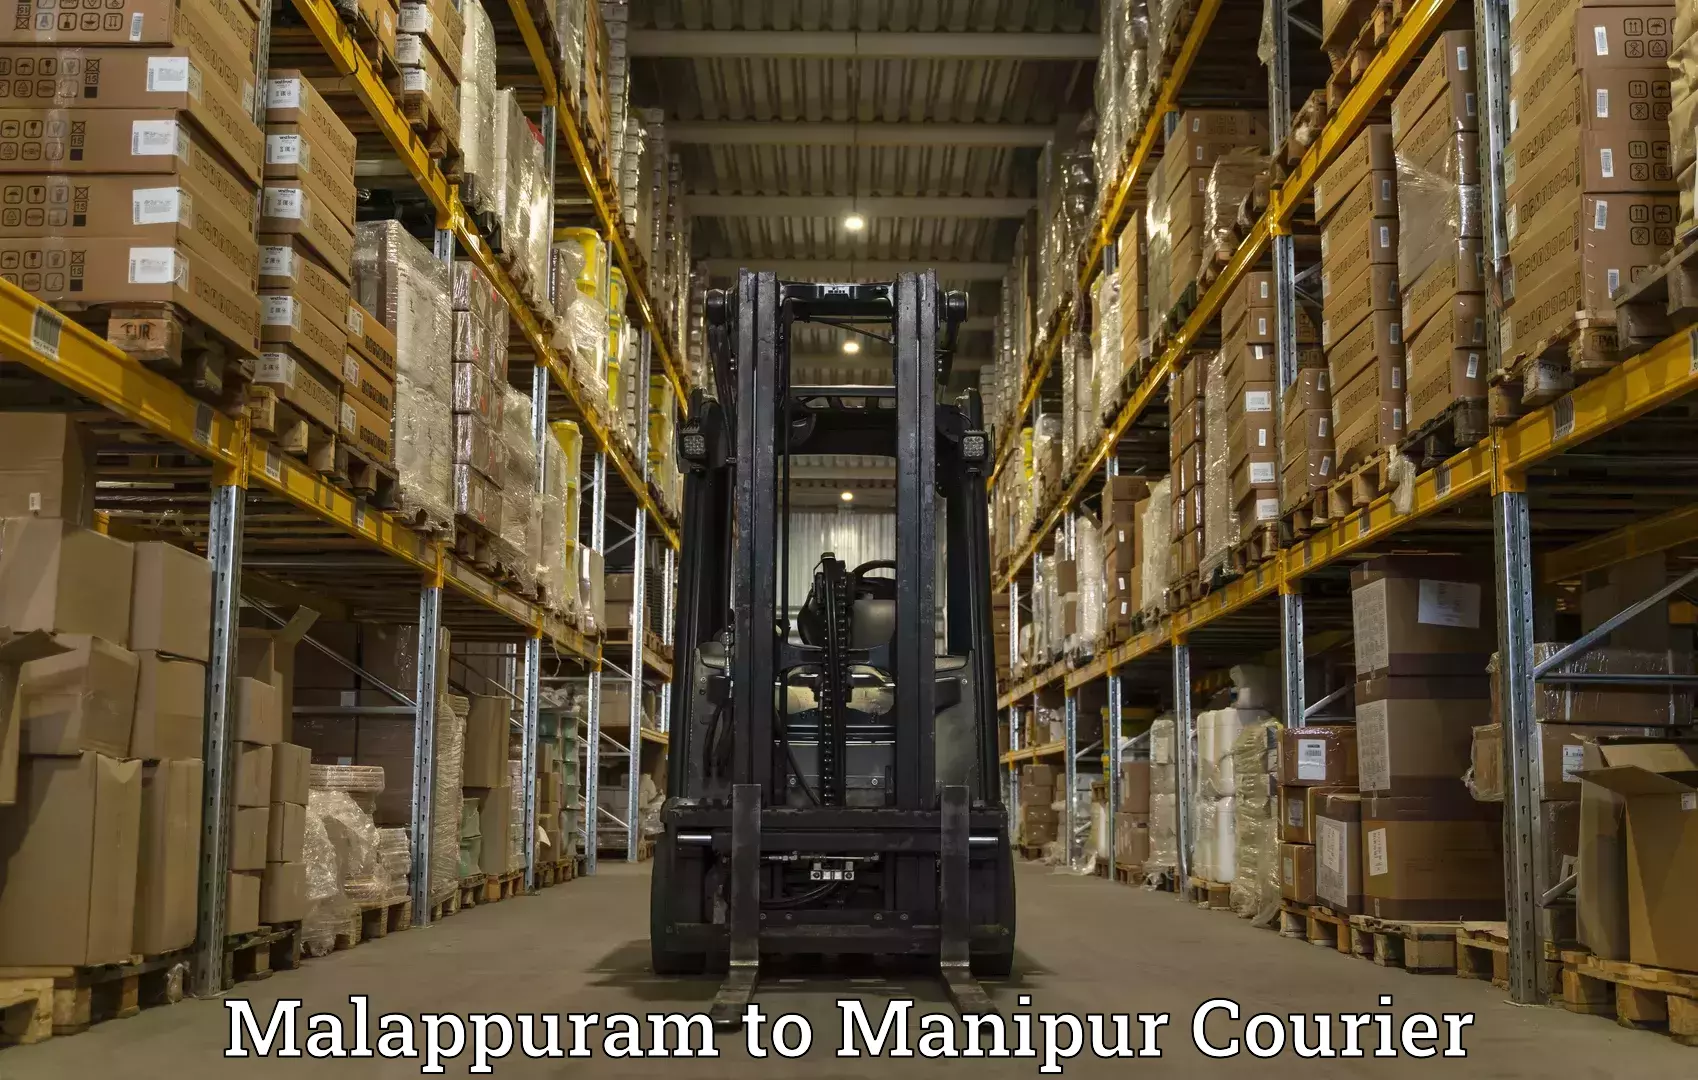 State-of-the-art courier technology in Malappuram to Manipur